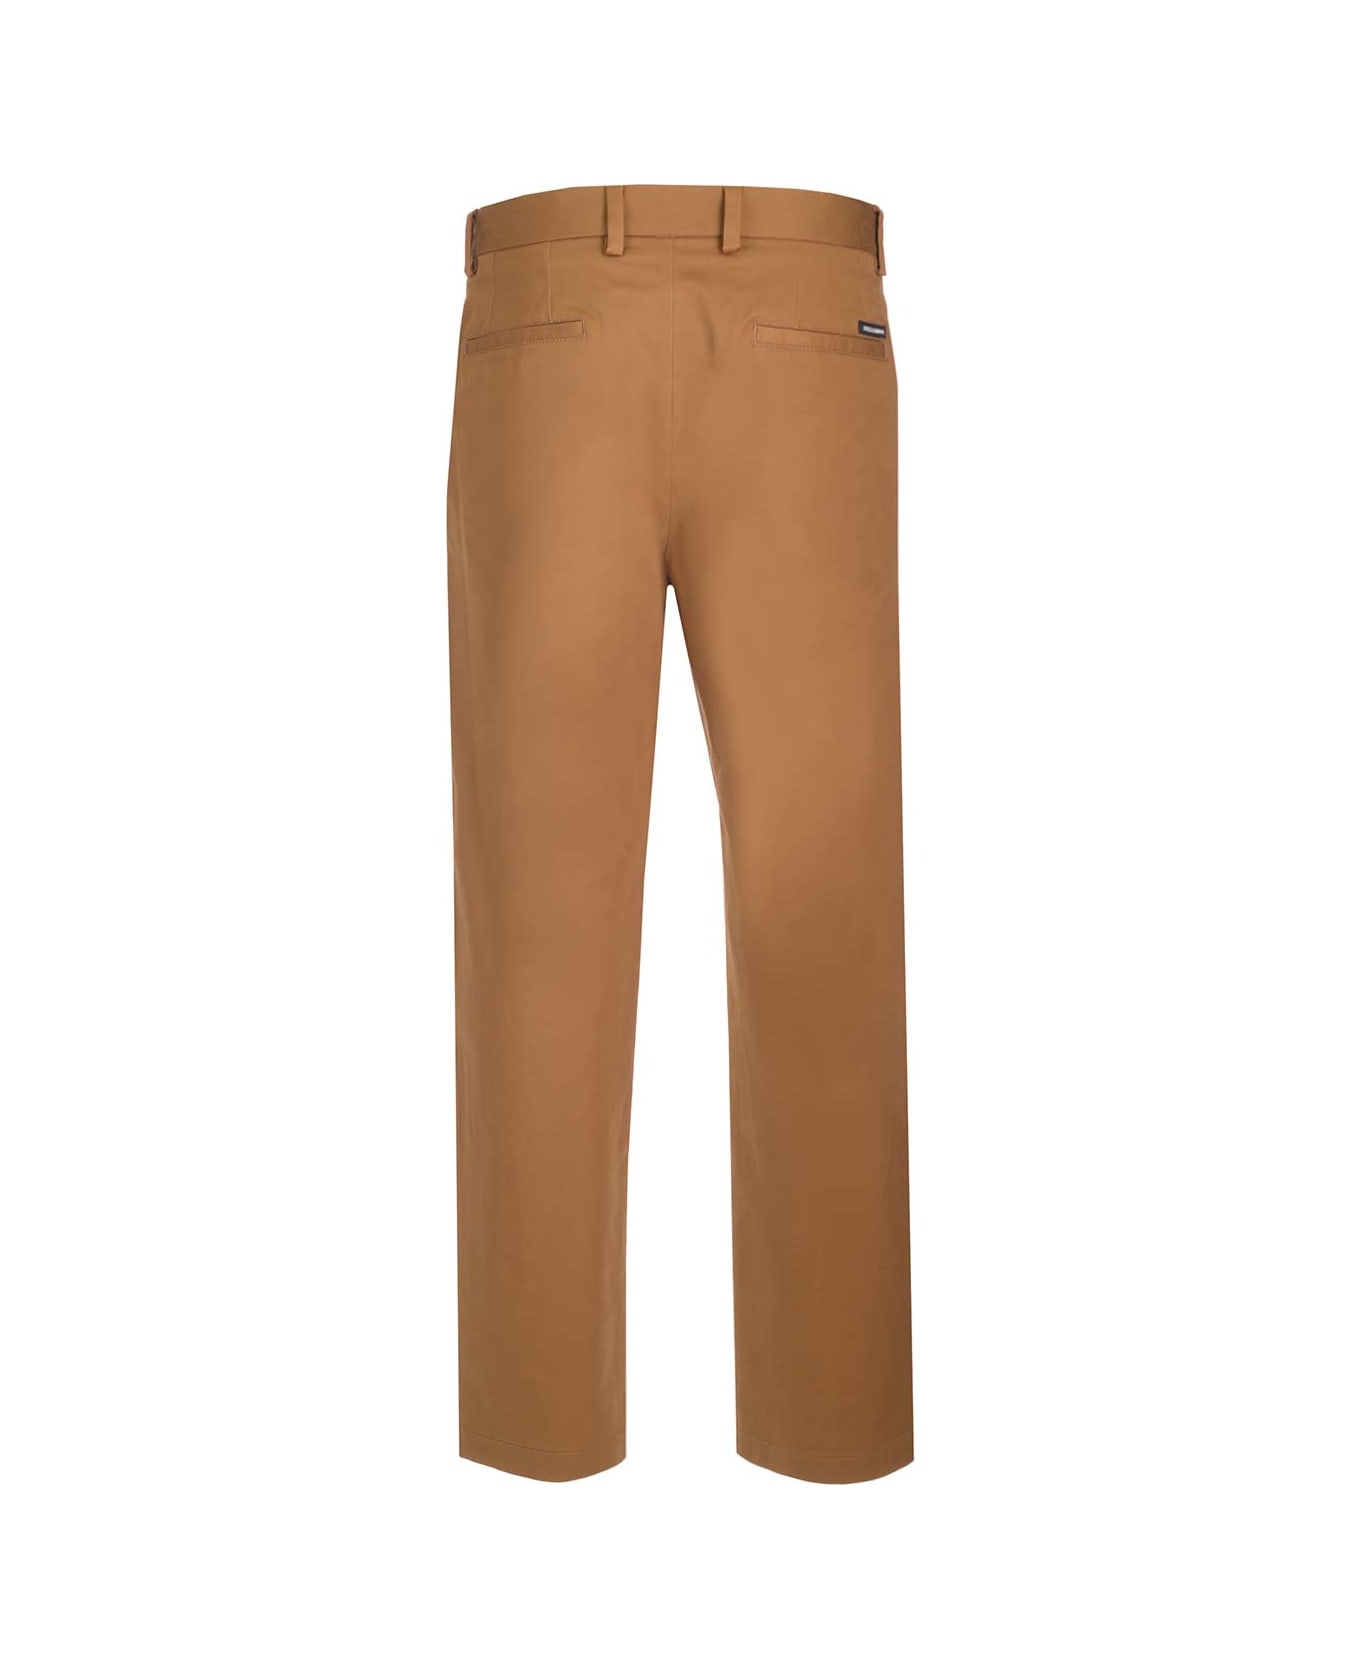 Dolce & Gabbana Roma Trousers - Brown